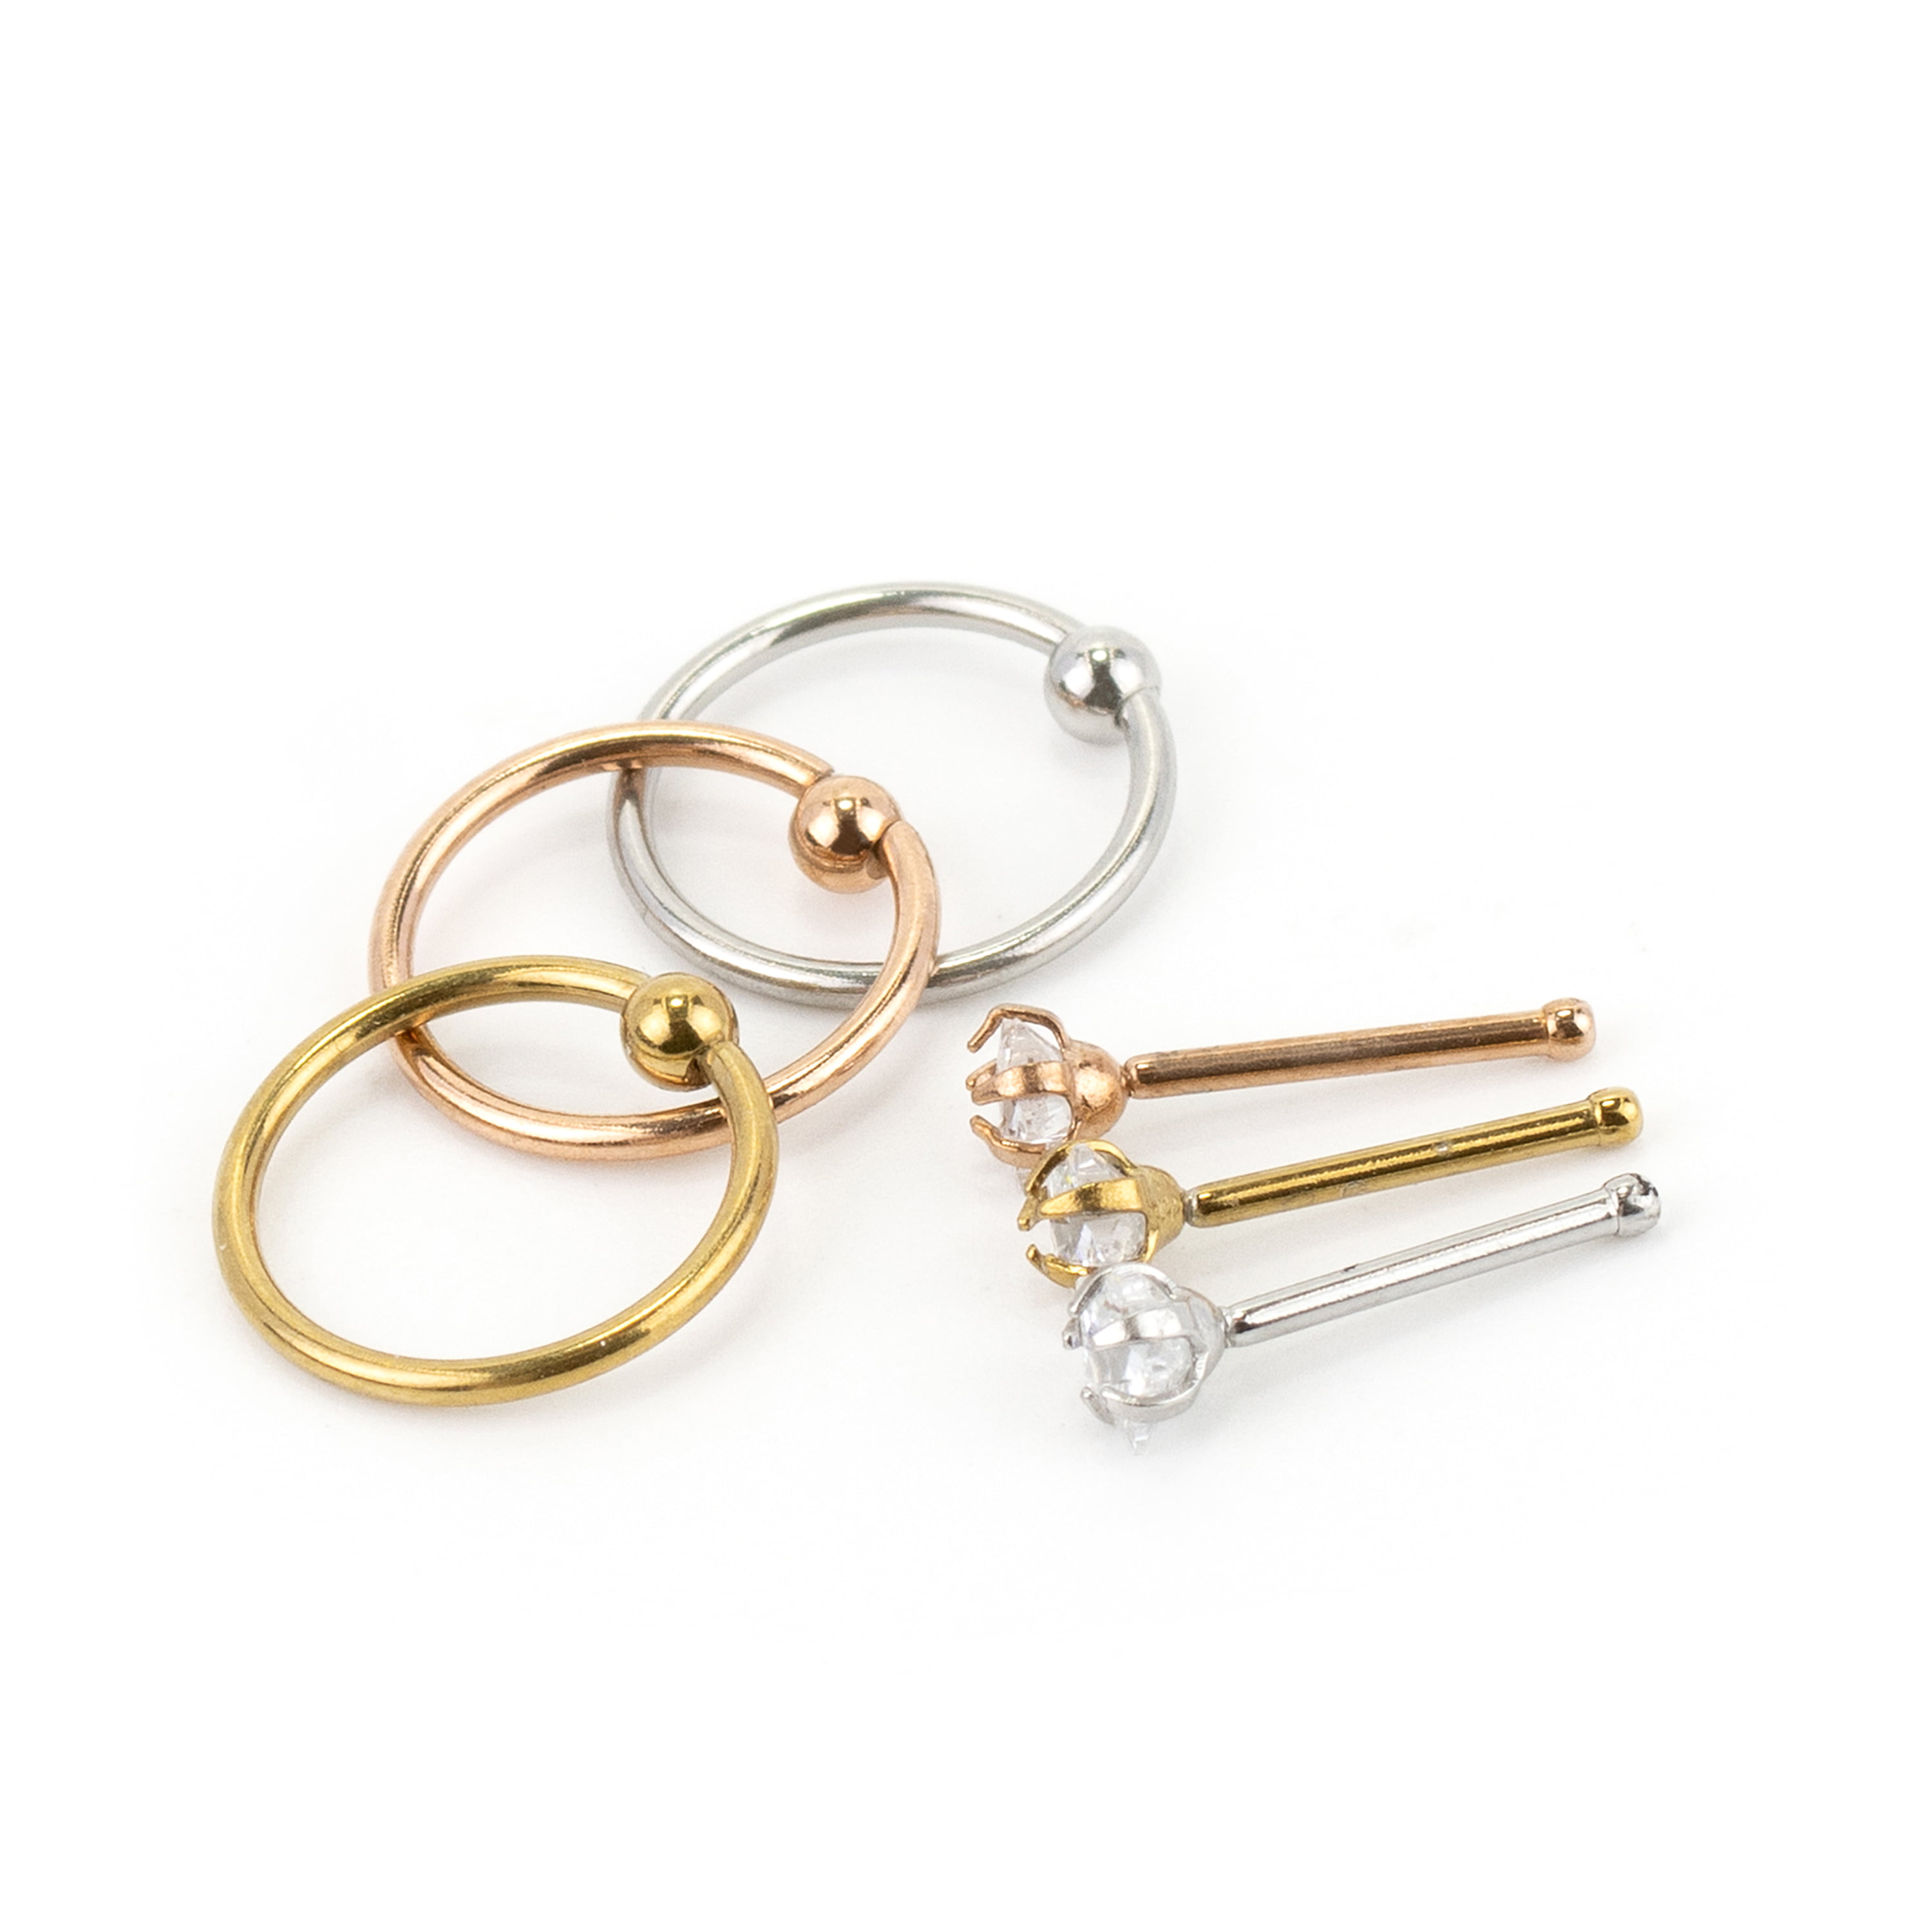 Gold Plated Stainless Steel Star Hoop Nose Ring With Star, Moon, And Helix  Daith Earrings ZS 16G Septum Clicker Jewelry 230328 From Jia05, $4.41 |  DHgate.Com